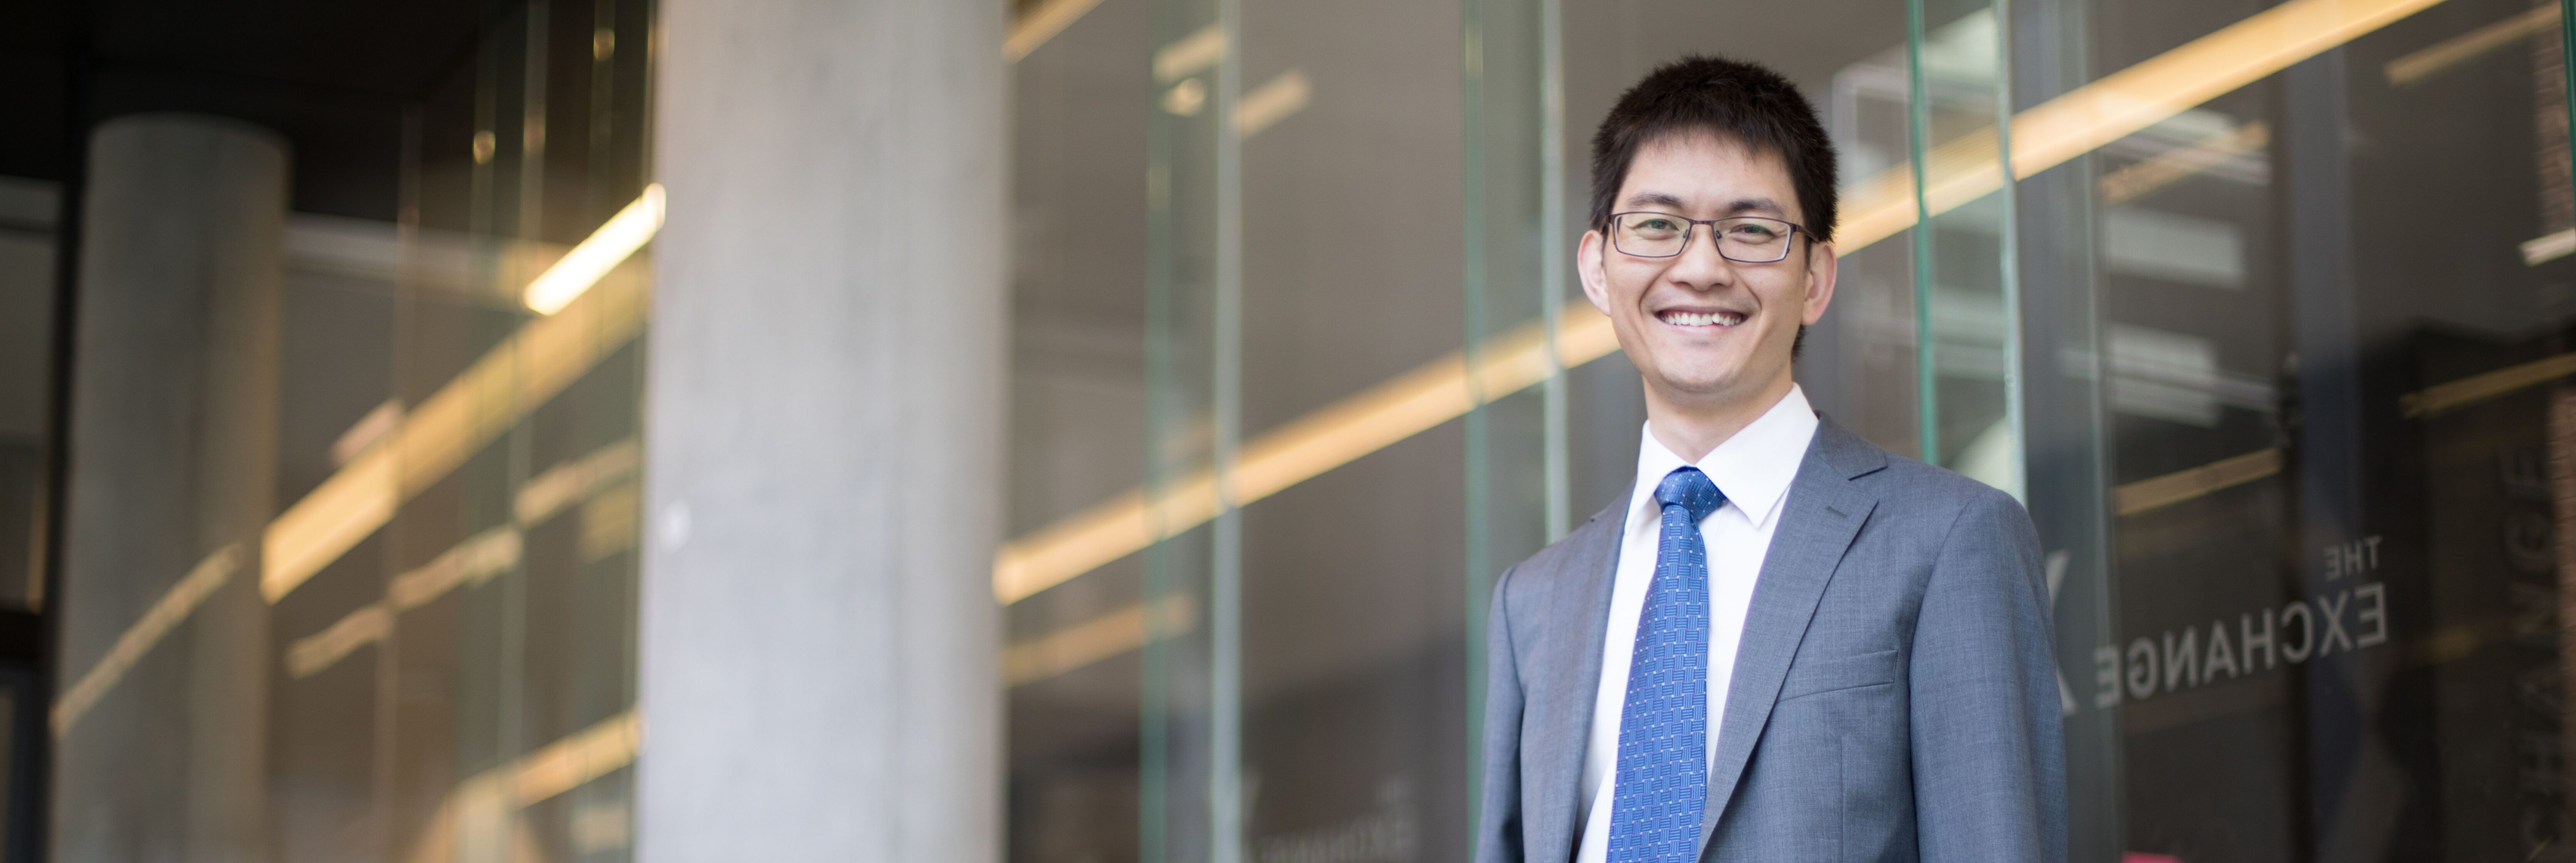 Image for From Beijing to Toronto: An International Rotman MBA Student Shares Transition Tips